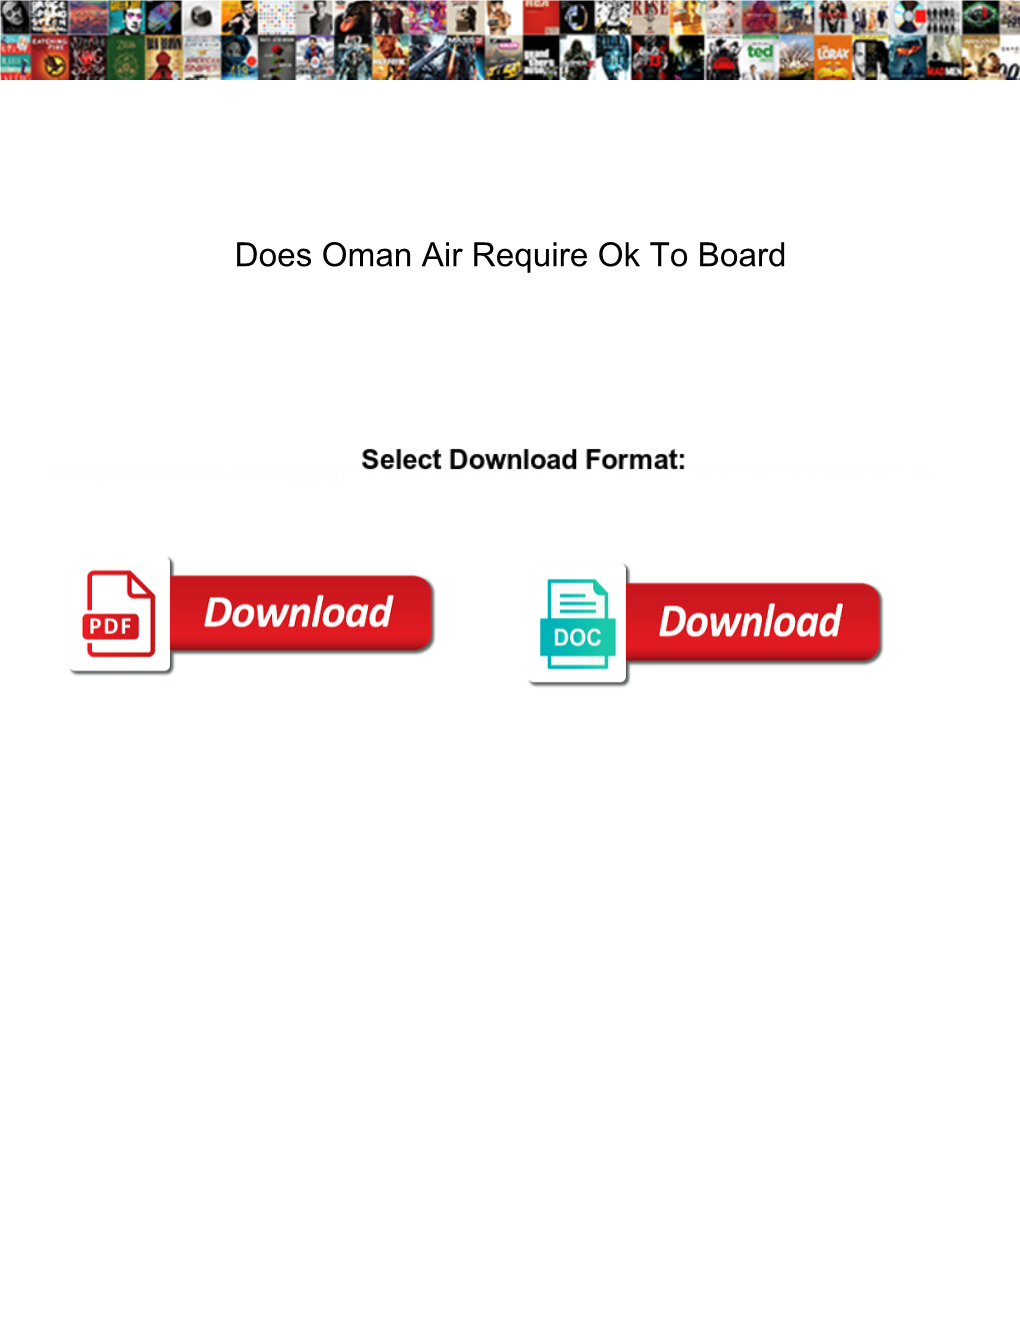 Does Oman Air Require Ok to Board